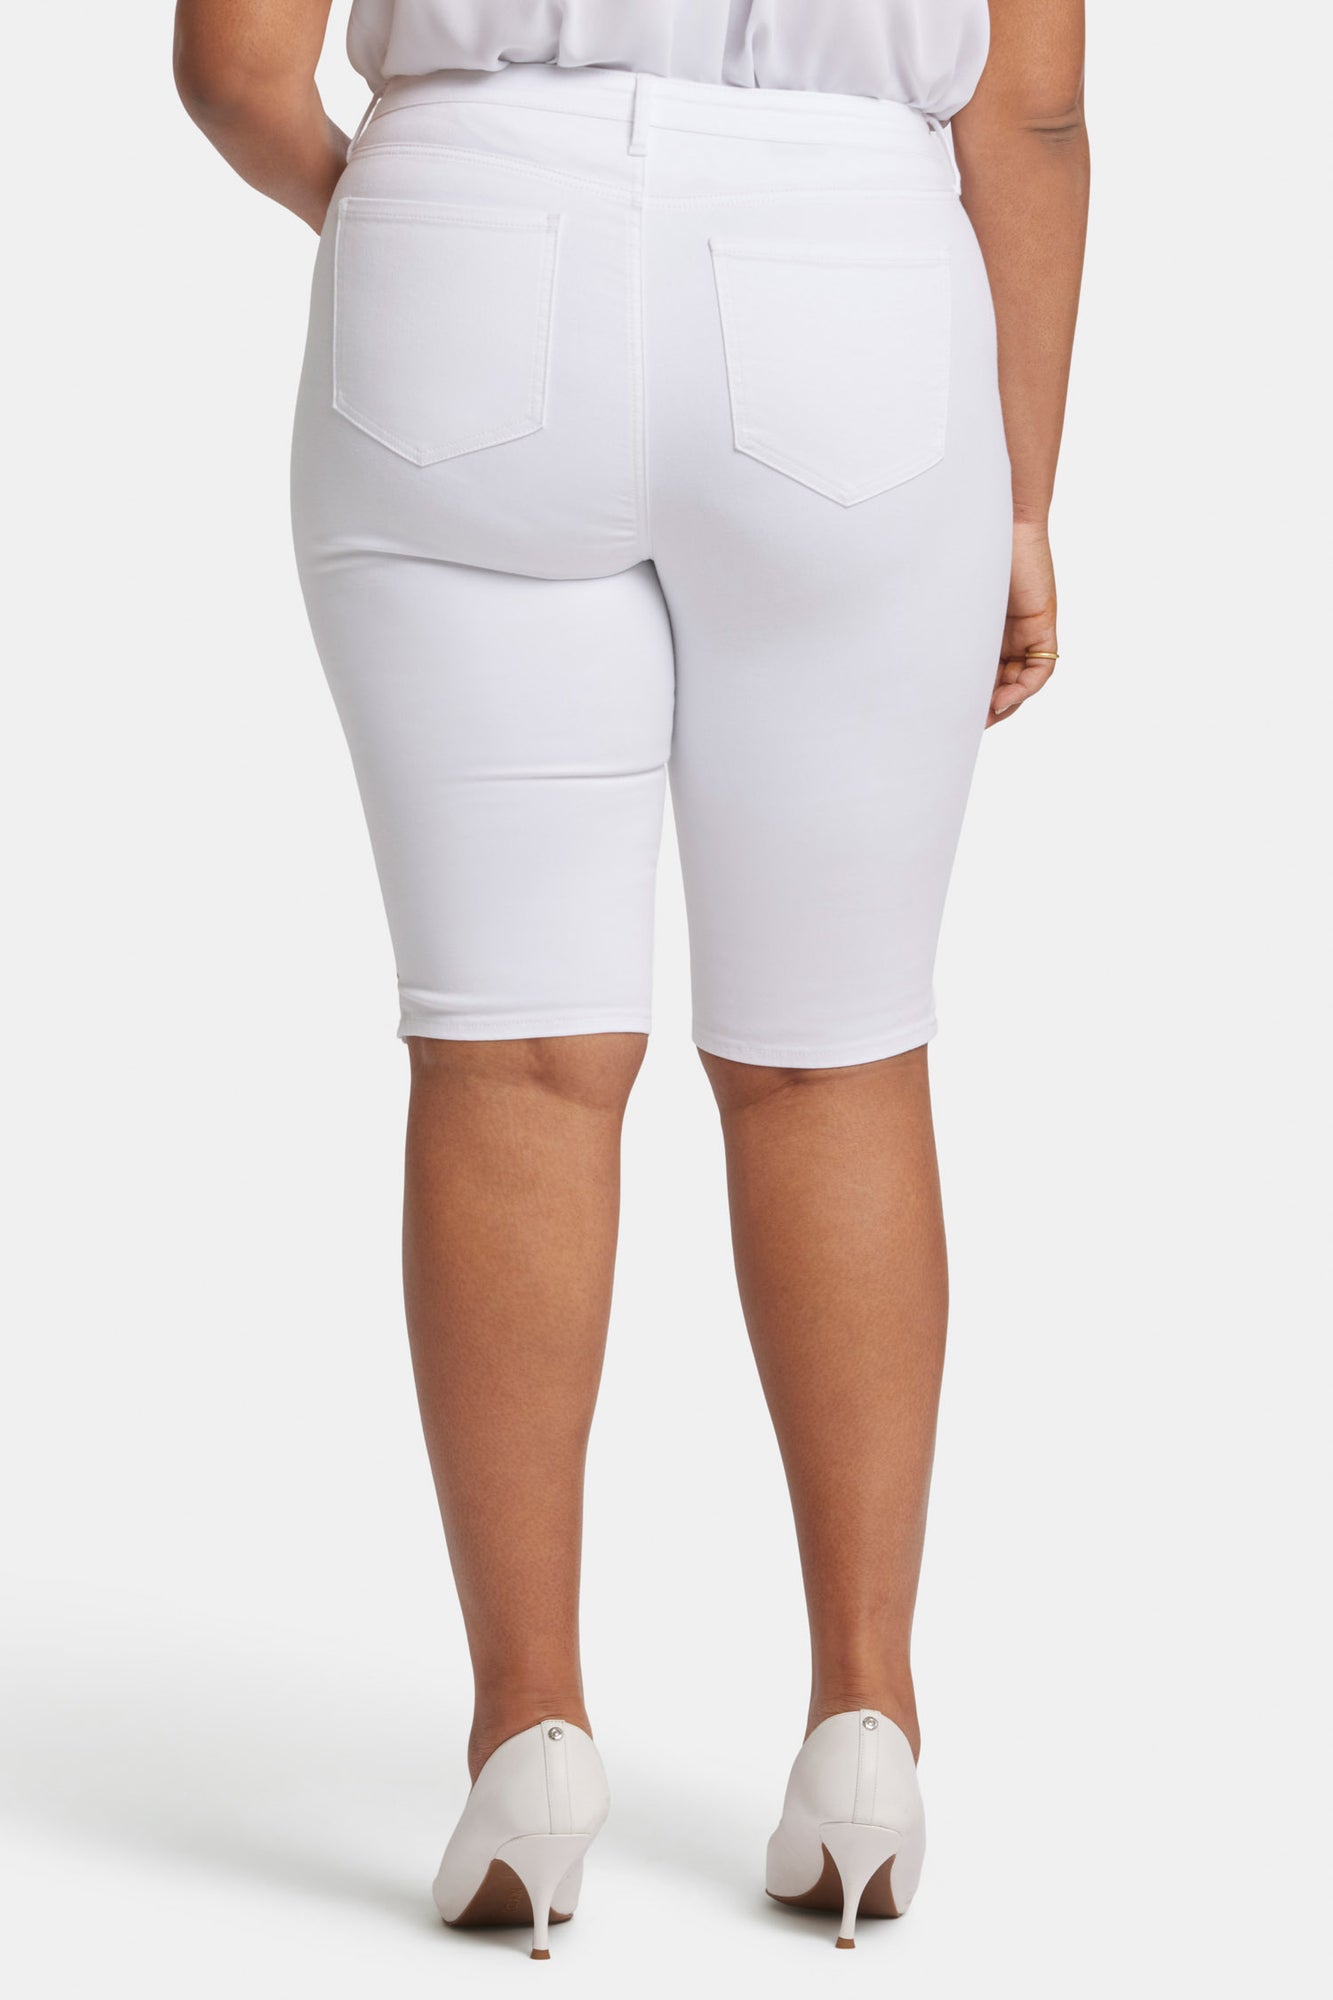 NYDJ Sophie Bike Capri Jeans In Plus Size With Riveted Side Slits - Optic White